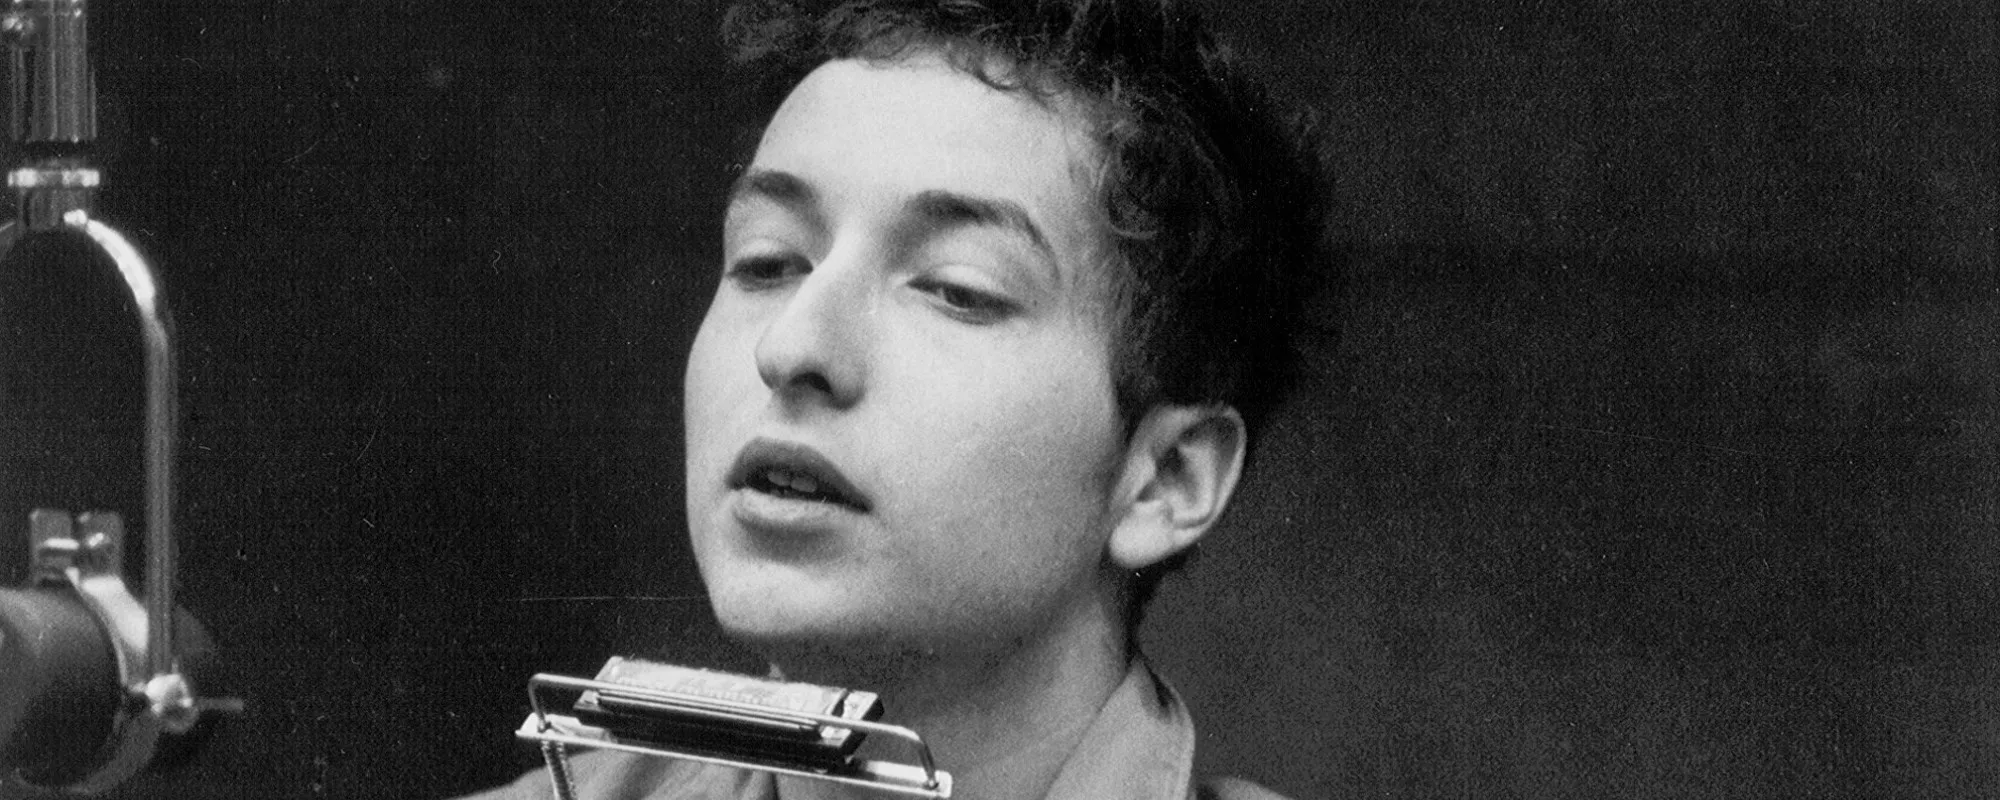 5 Must-Know Facts About Bob Dylan’s 1962 Self-Titled Debut Album—Released 62 Years Ago